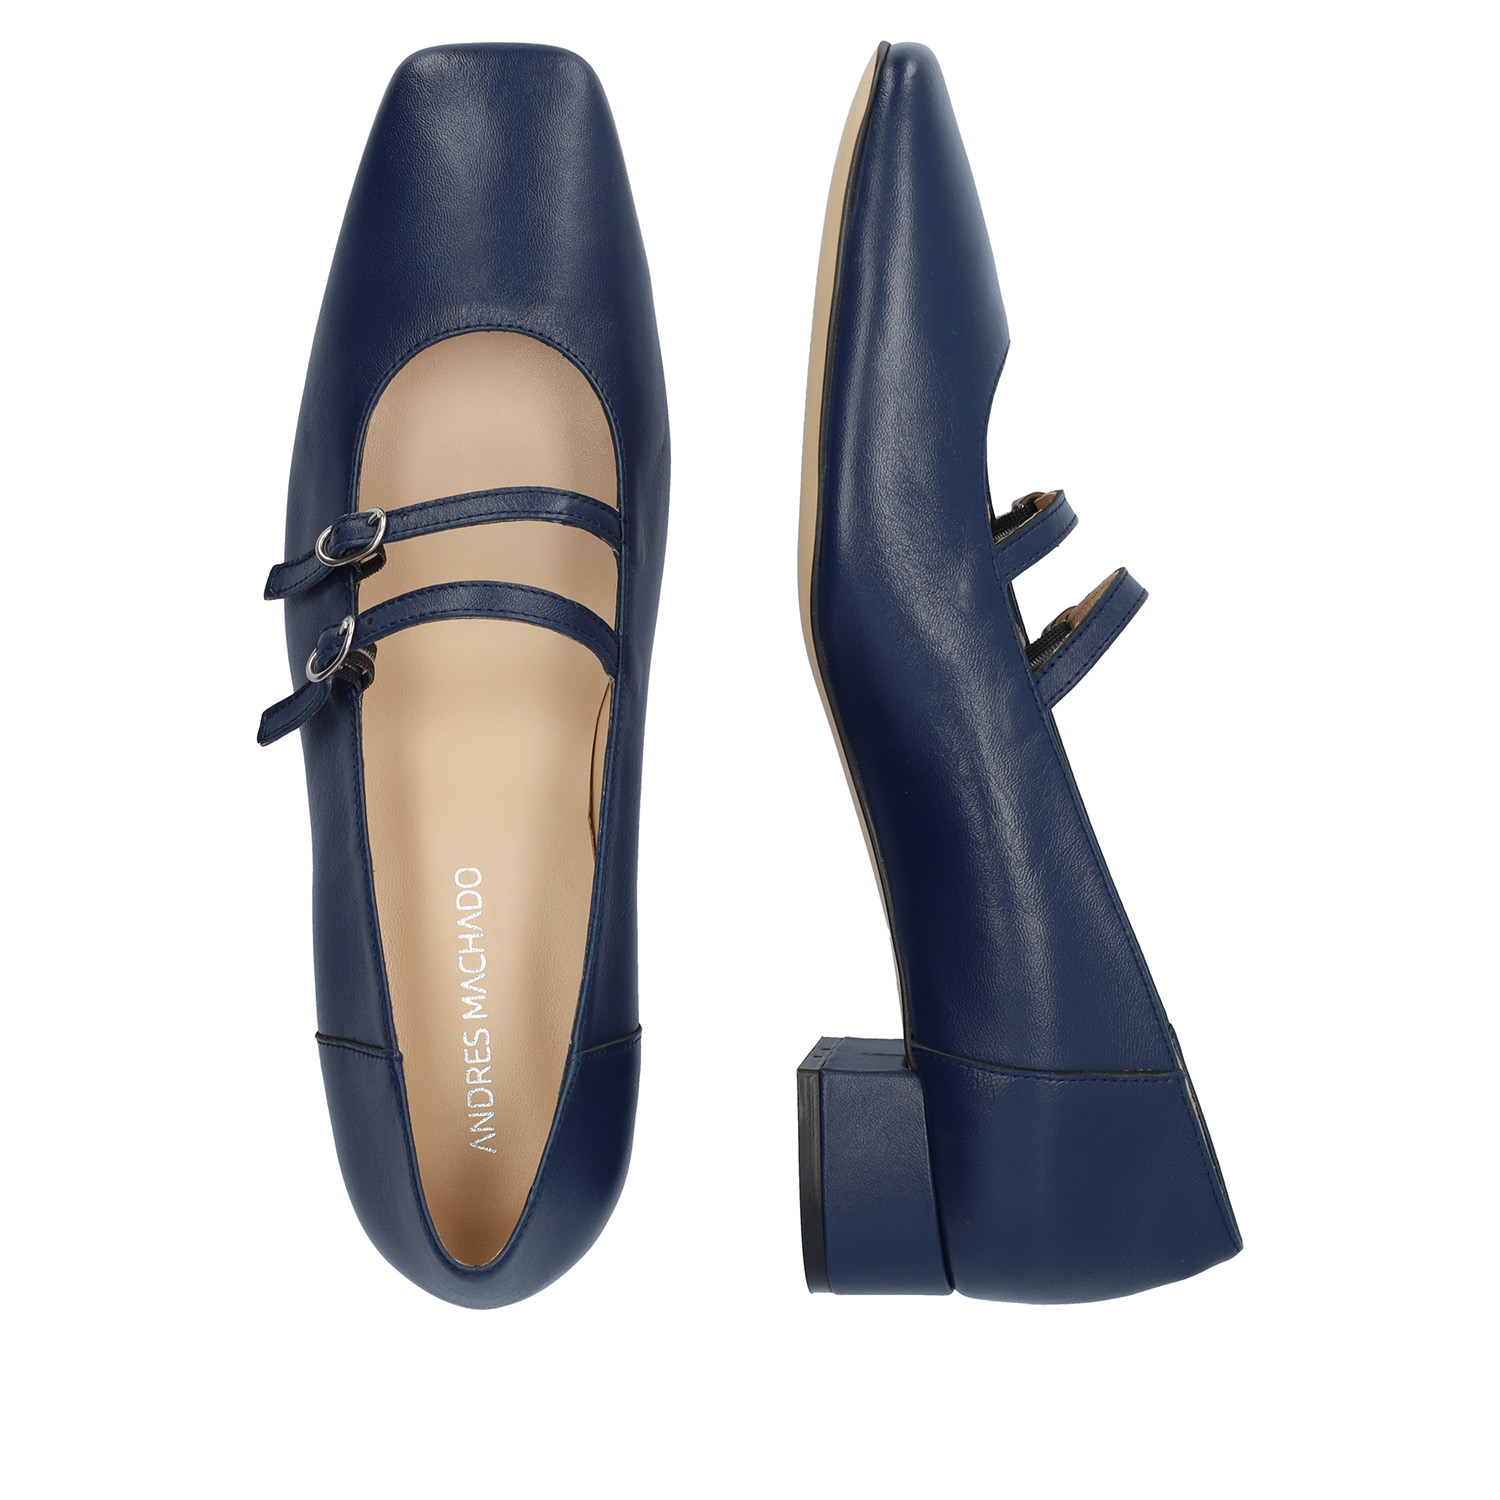 Heeled leather shoes in navy colour. 